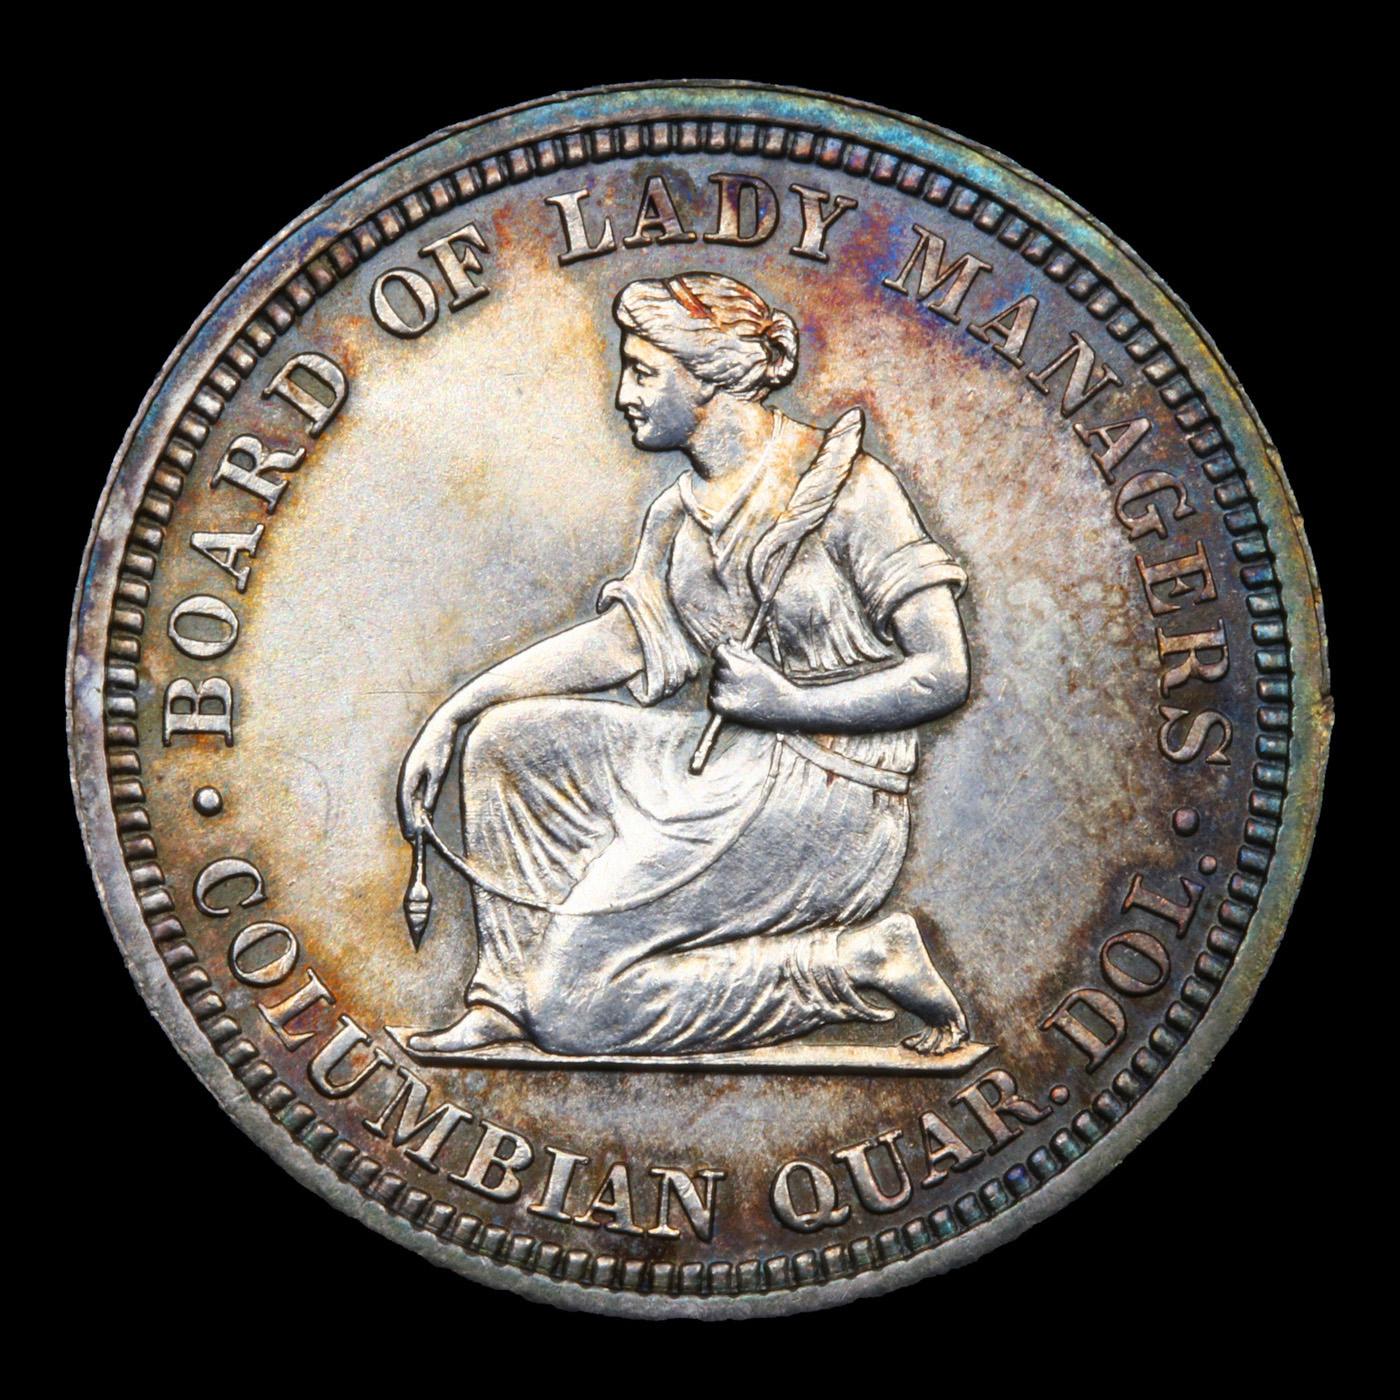 ***Auction Highlight*** 1893 Isabella Isabella Quarter 25c Graded Choice Unc By USCG (fc)